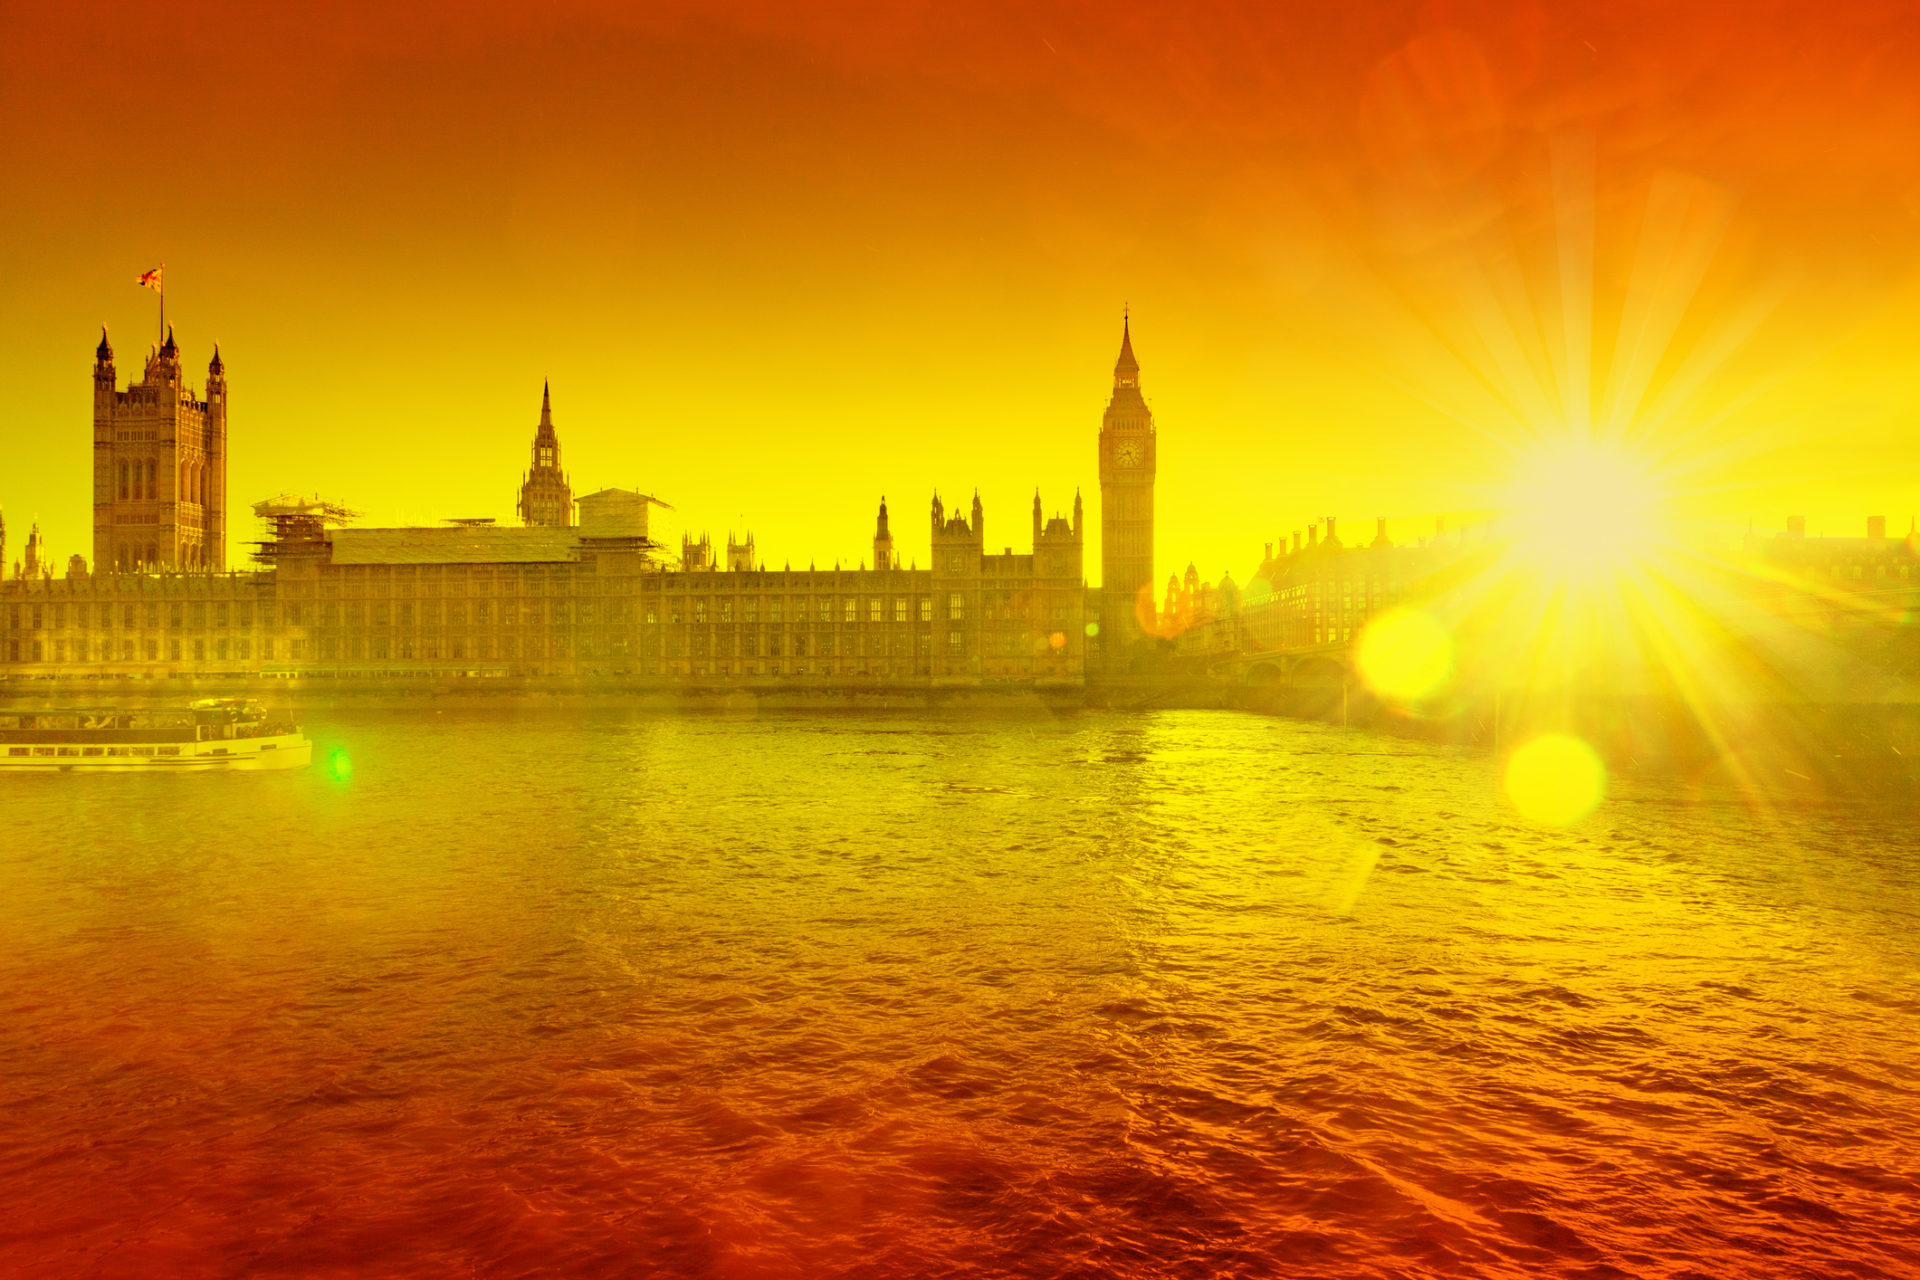 The river Thames with the houses of Parliament in silhouette in the background at sunset on a hot day (Image: Dreamstime)